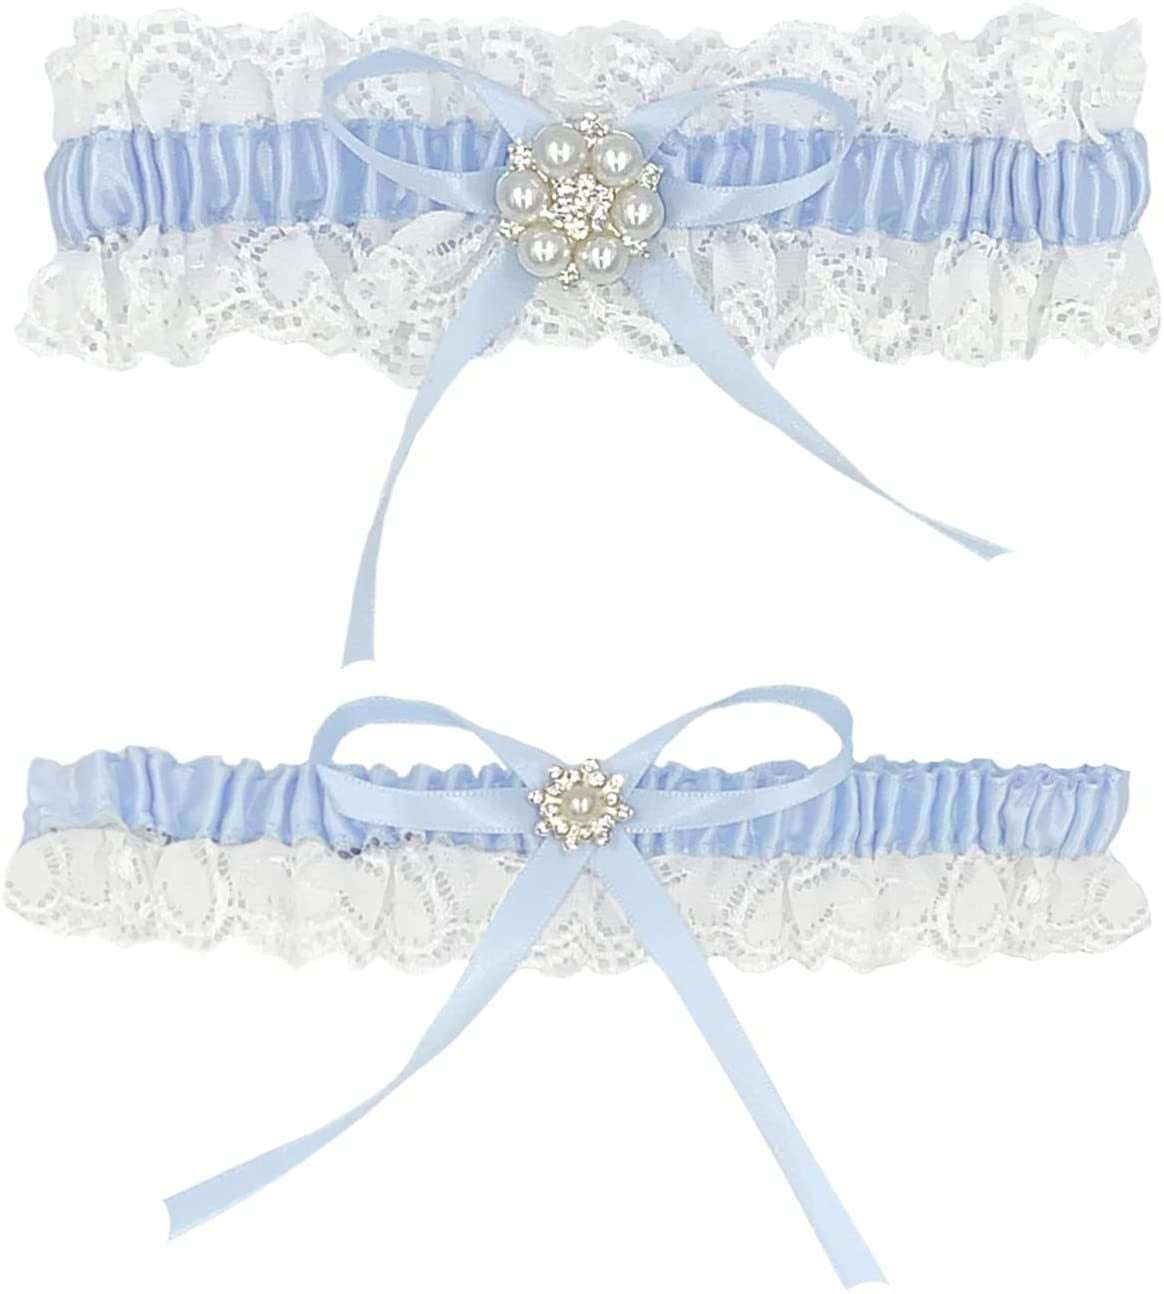 Lace Garter With Ribbon Bow & Pearl Heart Bead White Blue Ivory Wedding Bridal 